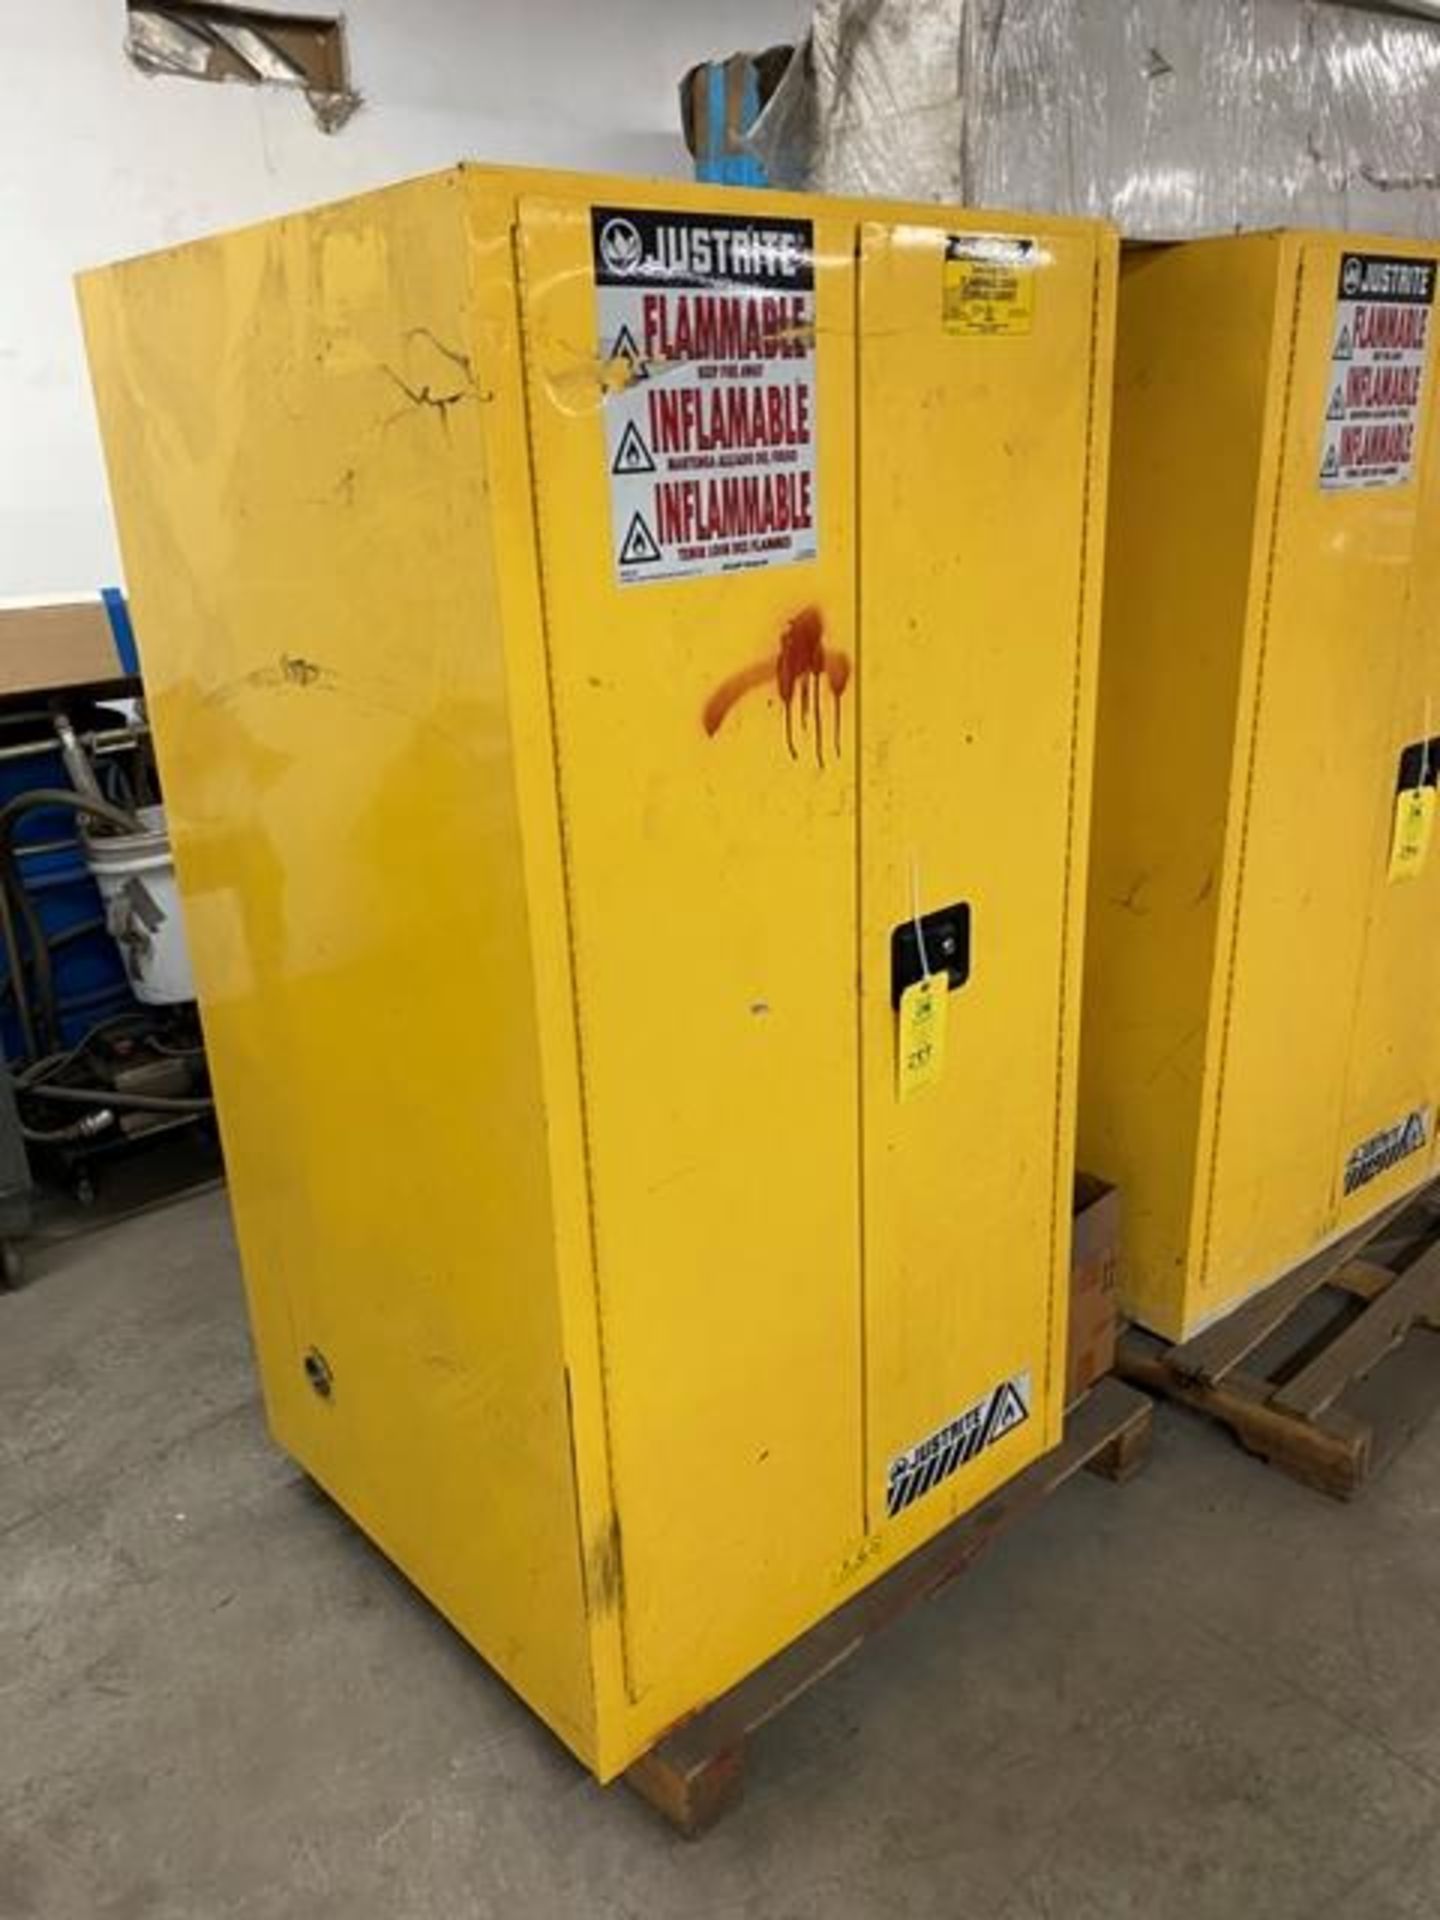 Justrite Flame Proof Cabinet Rigging Price $50 - Image 2 of 2